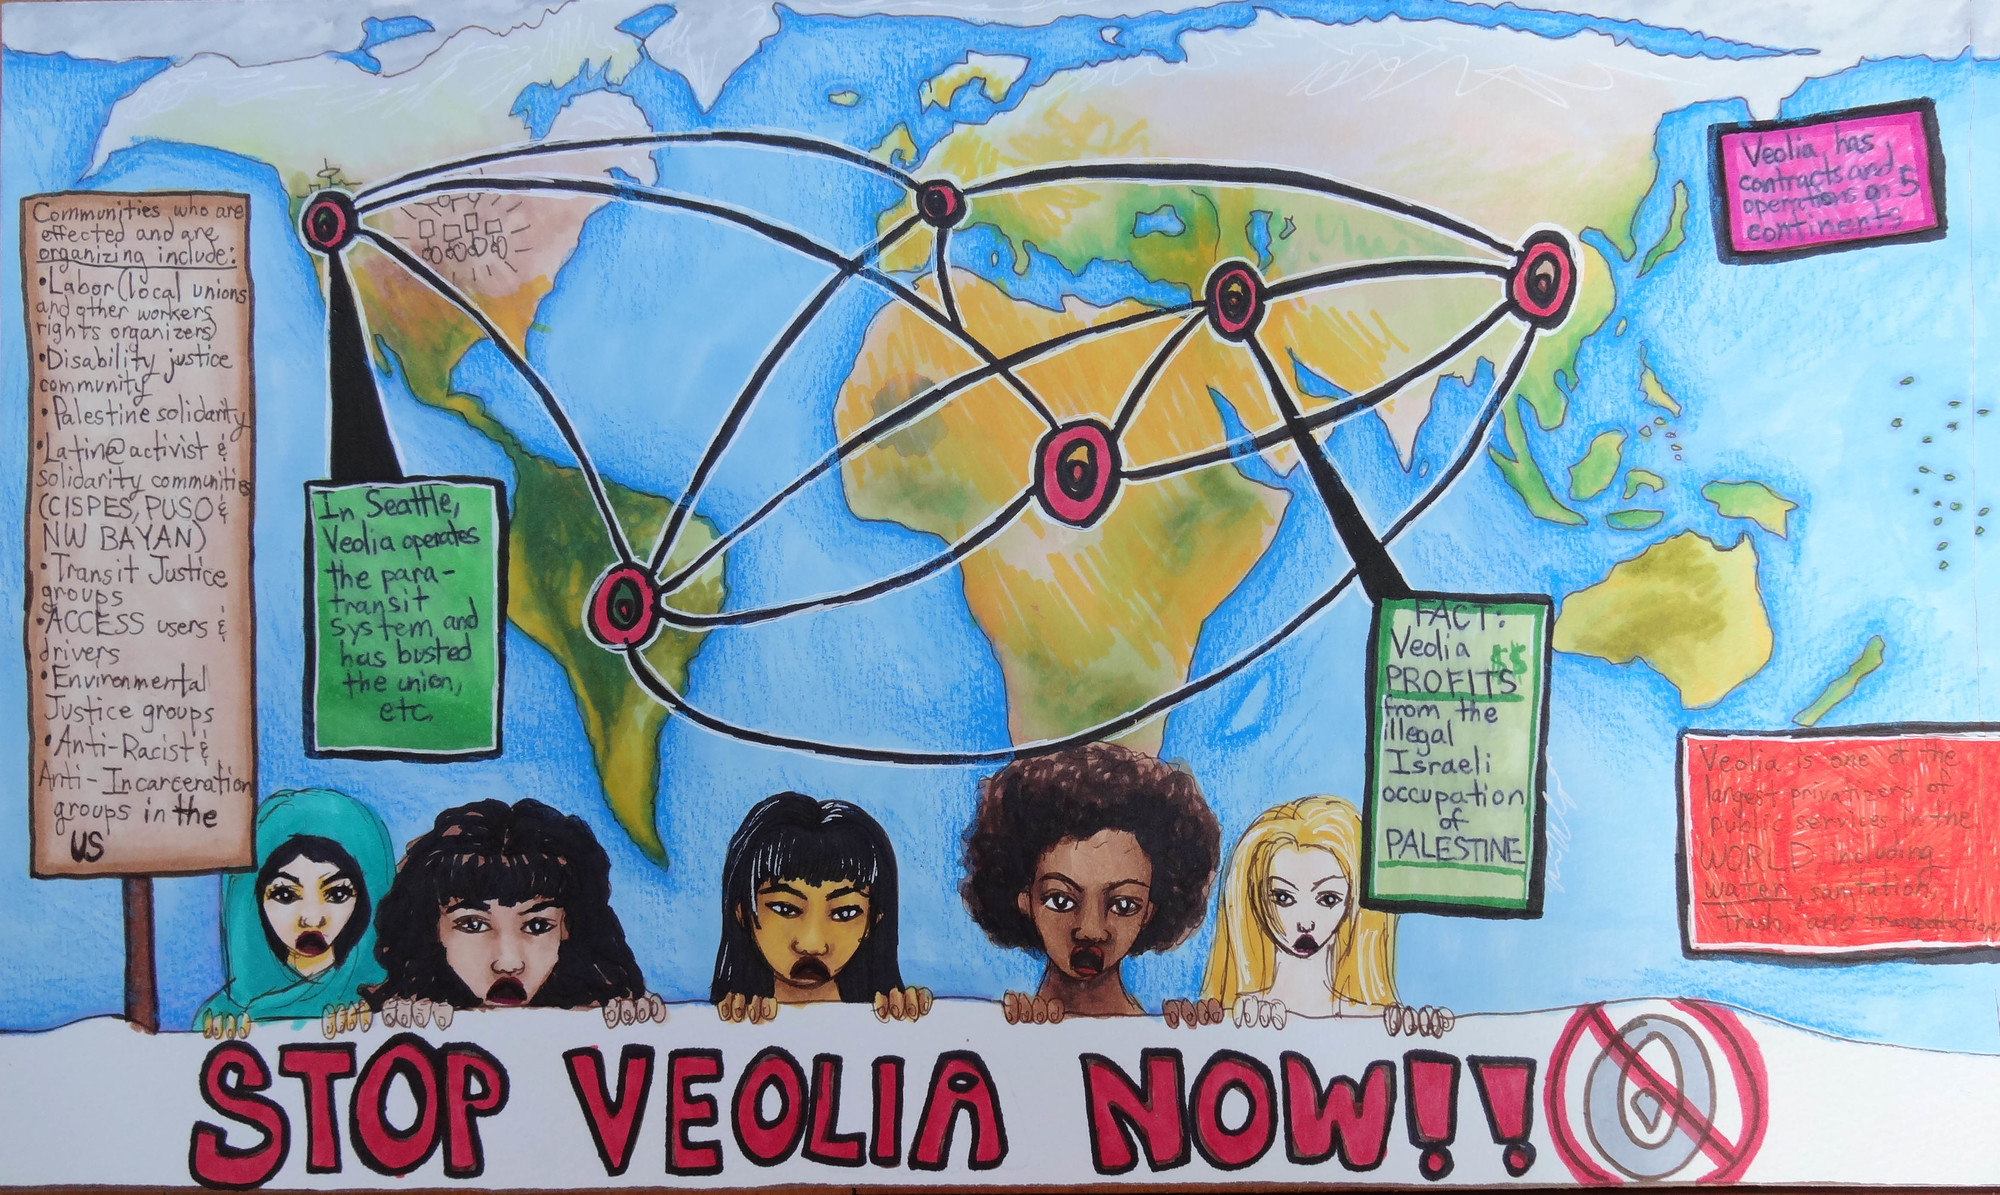 A hand-drawn poster shower a map of the world with rerd lines connecting dots on various continents, while five women with various hairstyles hold up a banner saying "Stop Veolia Now"